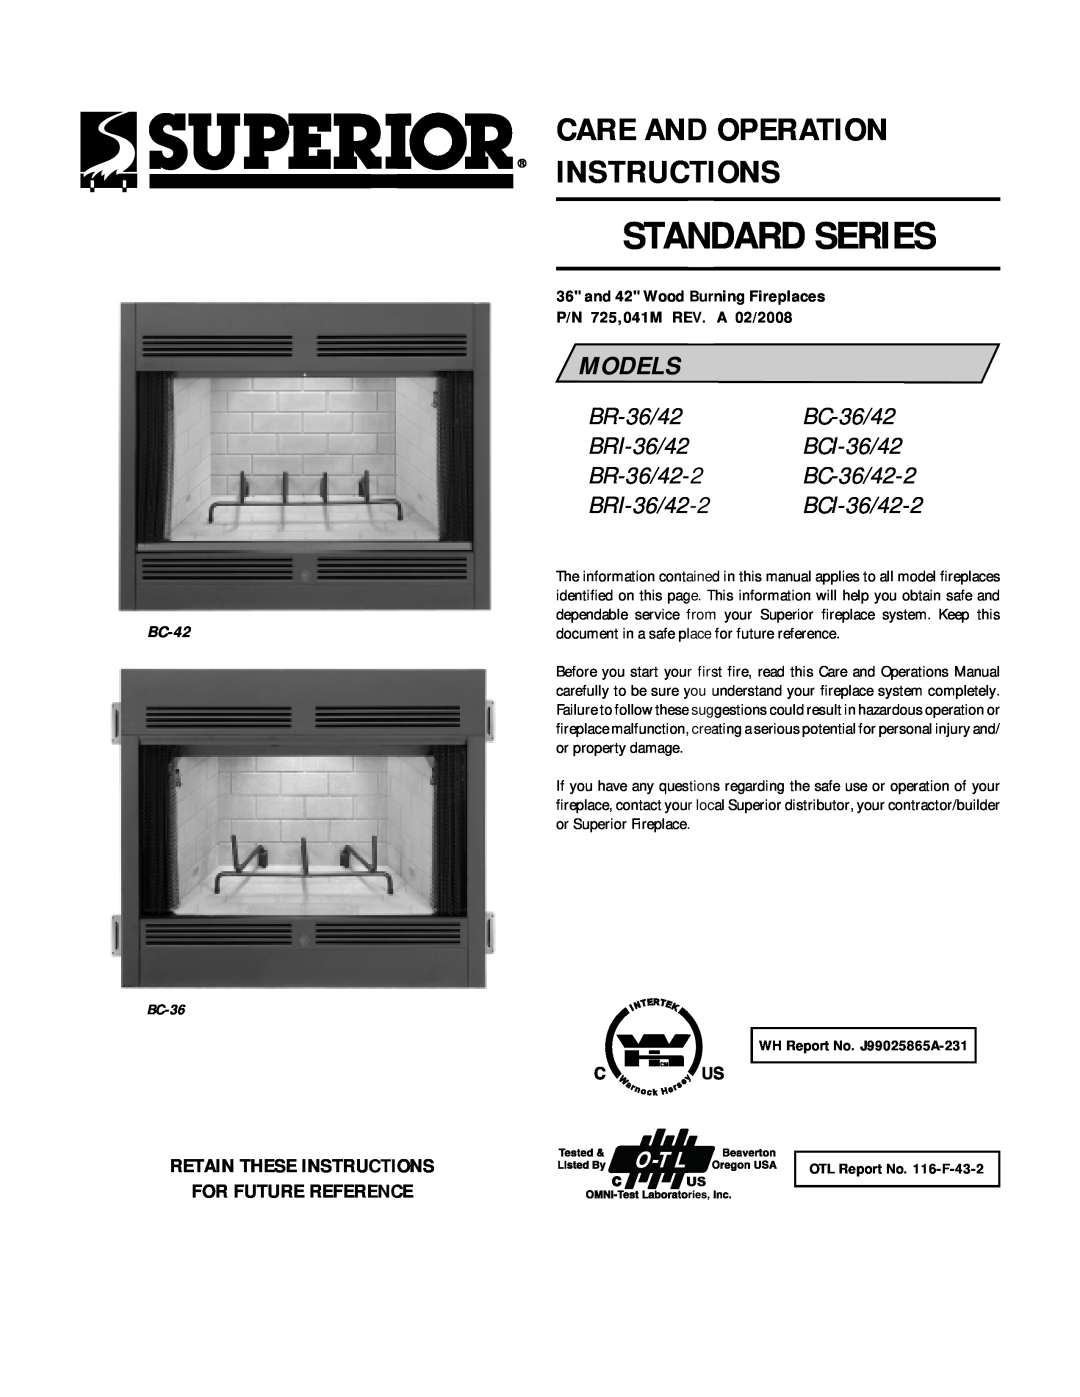 Lennox Hearth BRI-36/42 manual Retain These Instructions For Future Reference, Standard Series, Models, BC-42, BC-36 